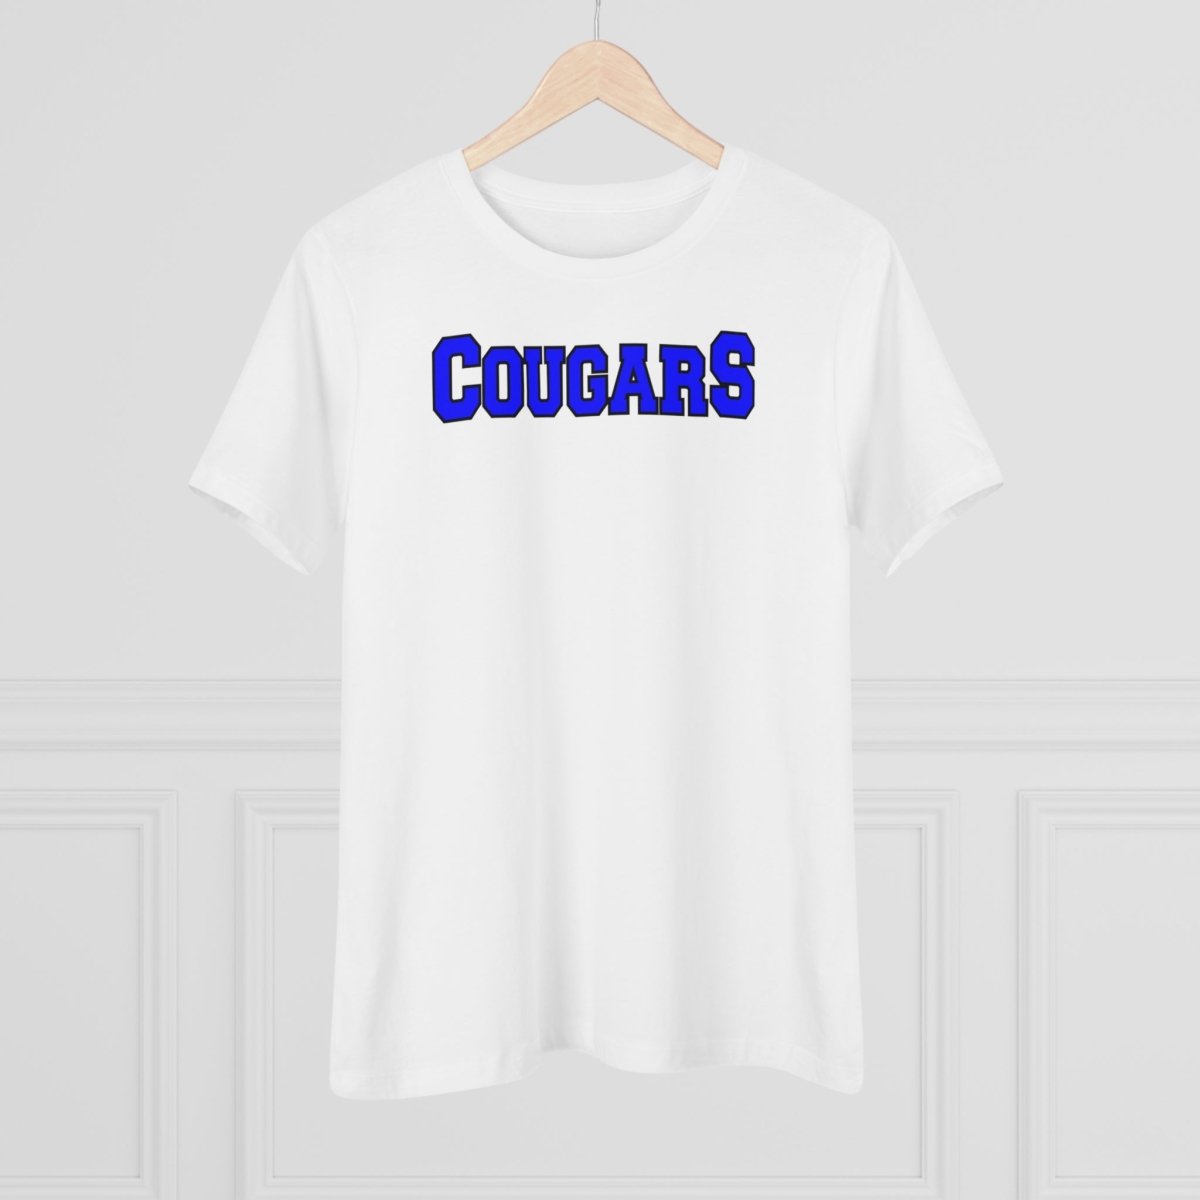 Cougar (Name) Women's Relaxed T-Shirt